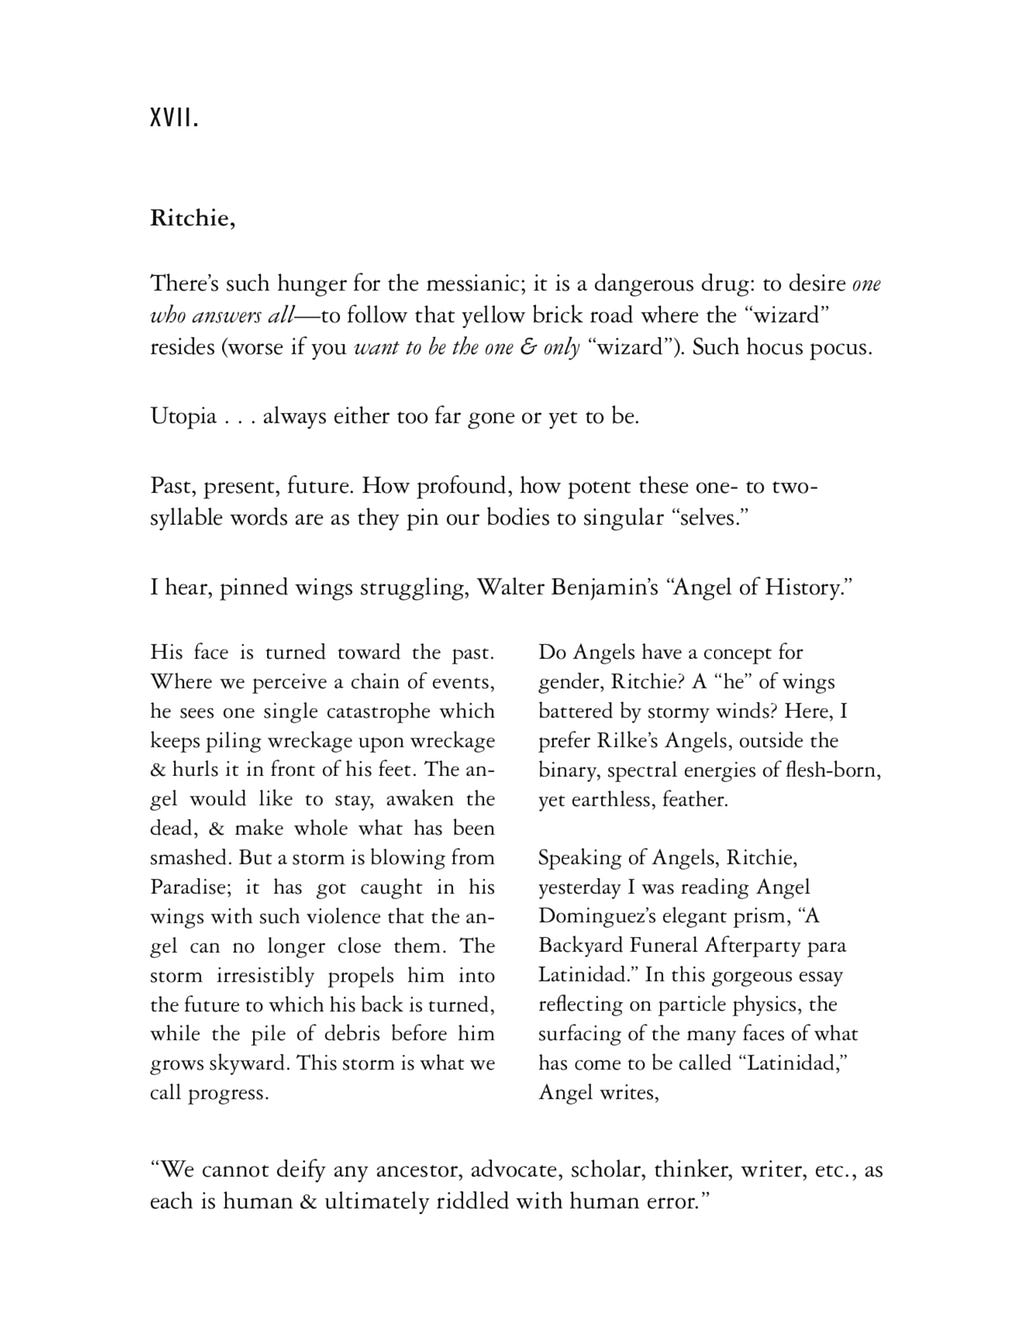 Page 1 out of 3, J. Michael Martinez’ poem Letter XVII. Posted as PDF to preserve unique layout of poem. For accessible text see below images.